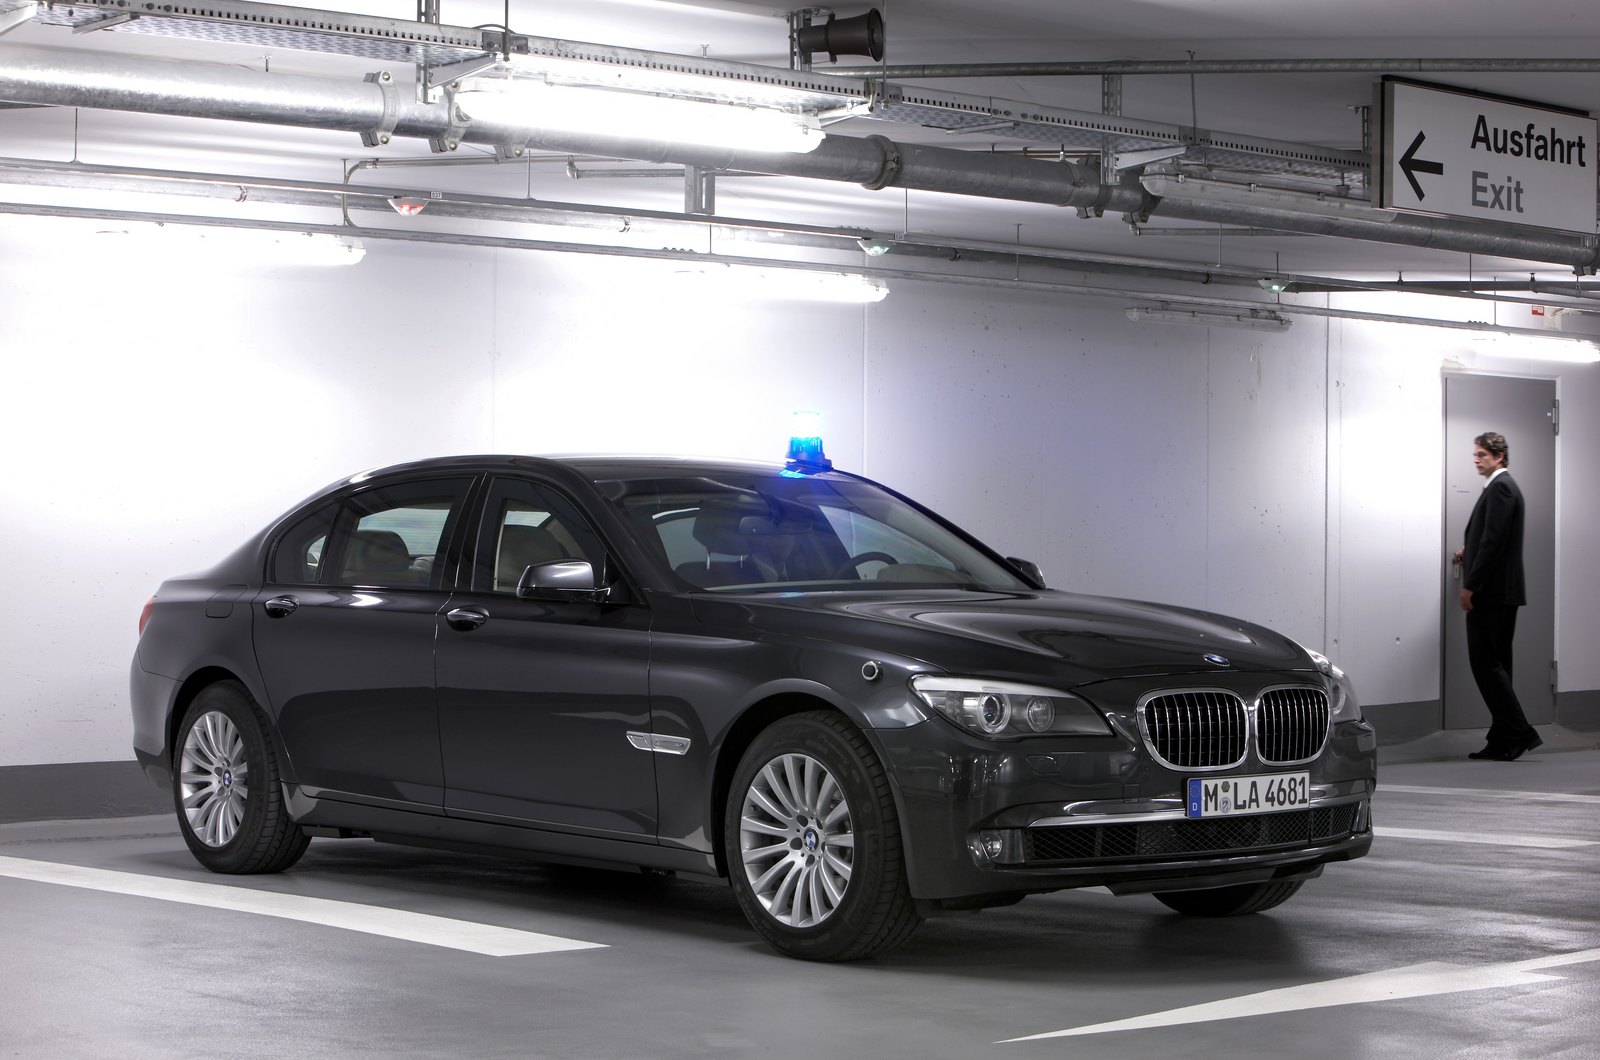 The BMW 750Li High Security accelerates from 0 to 100 km/h in 7.9 seconds.